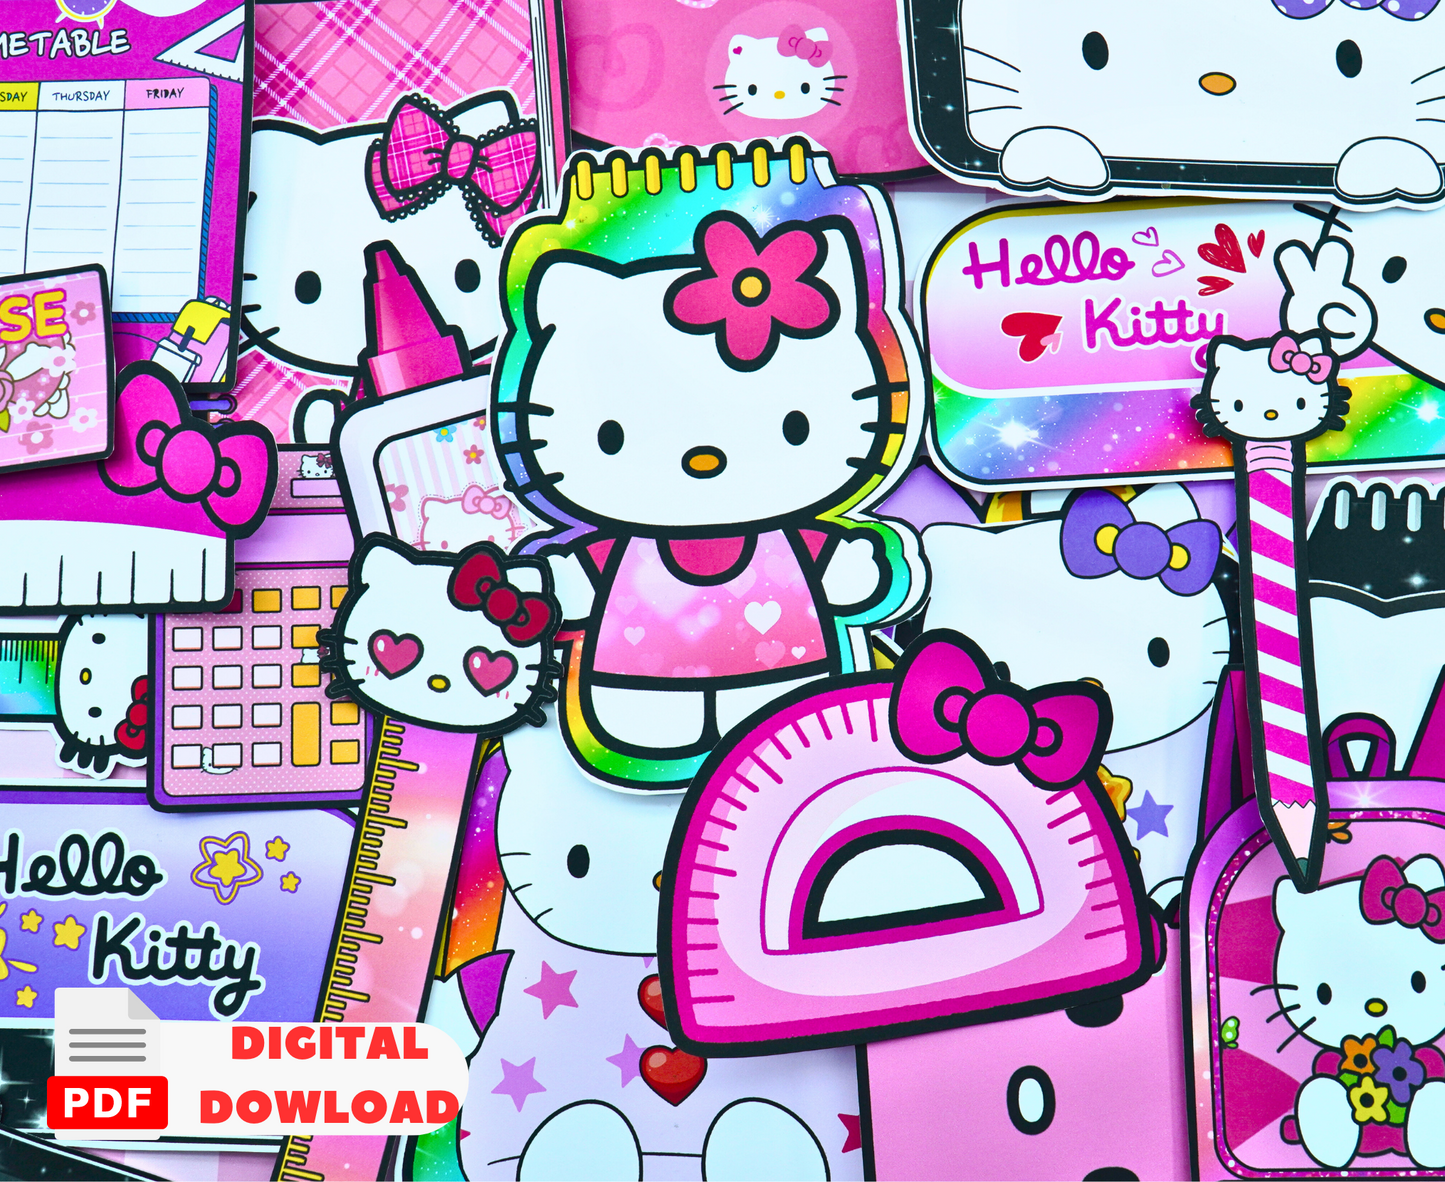 Hello Kitty Printable School Supplies Set 🌸 Refresh your study style with cute items | free product 🌸 Woa Doll Crafts